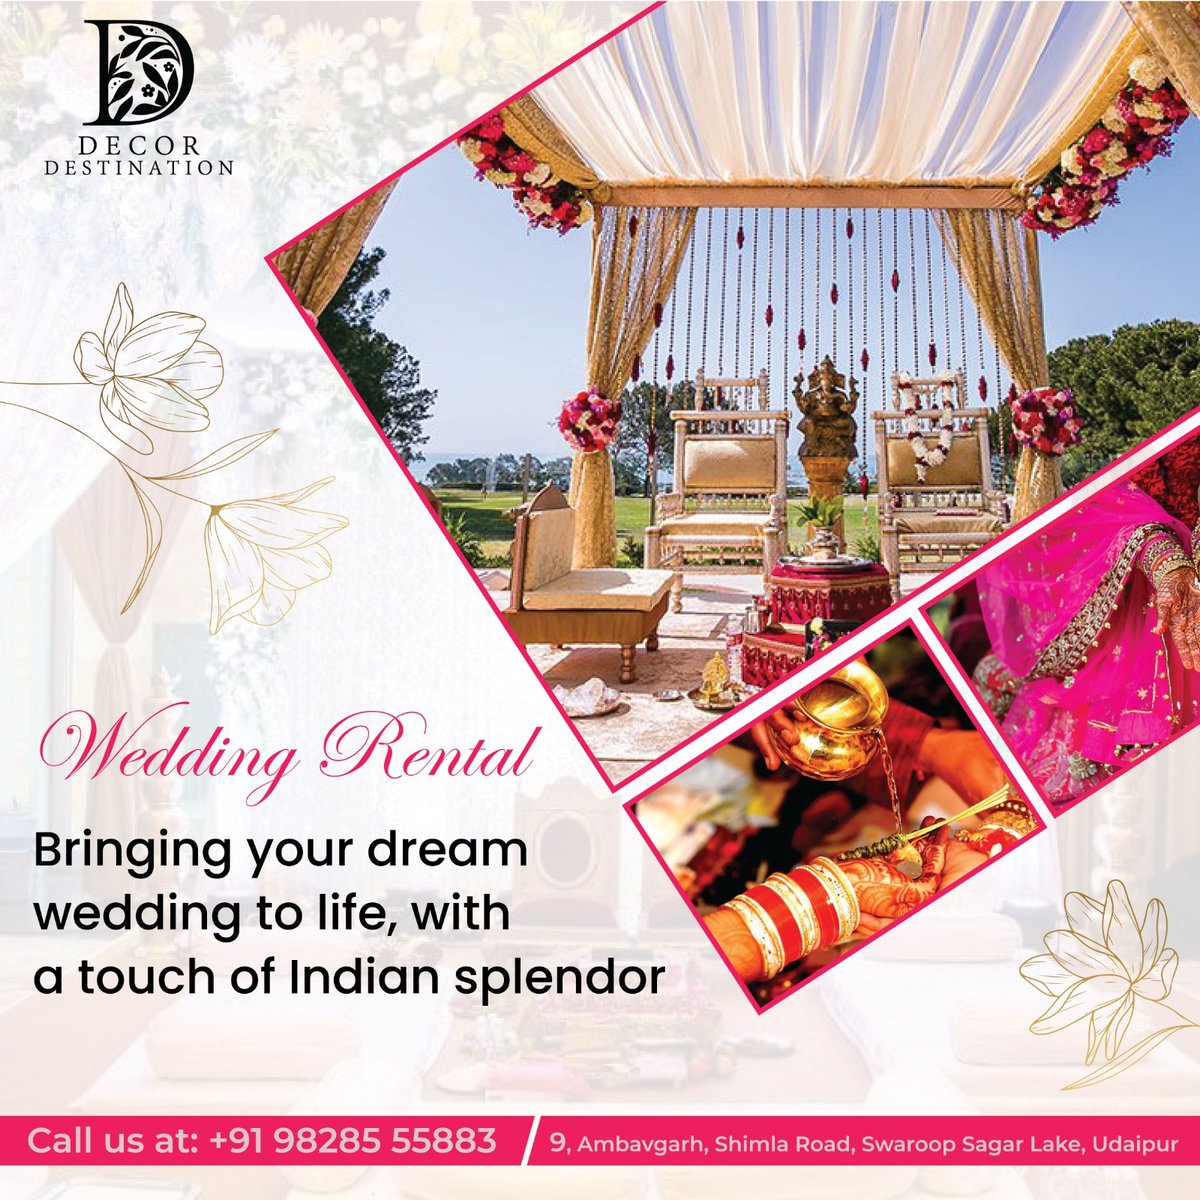 Make your dream wedding a reality with Decor Destination in Udaipur! Let's create a celebration that mirrors your love story and style

Contact Us
Website:- decordestination.in/wedding-rental…
📞 (+91):- 9828555883

#decordestination #WeddingRentals #EventRentals #WeddingDecor